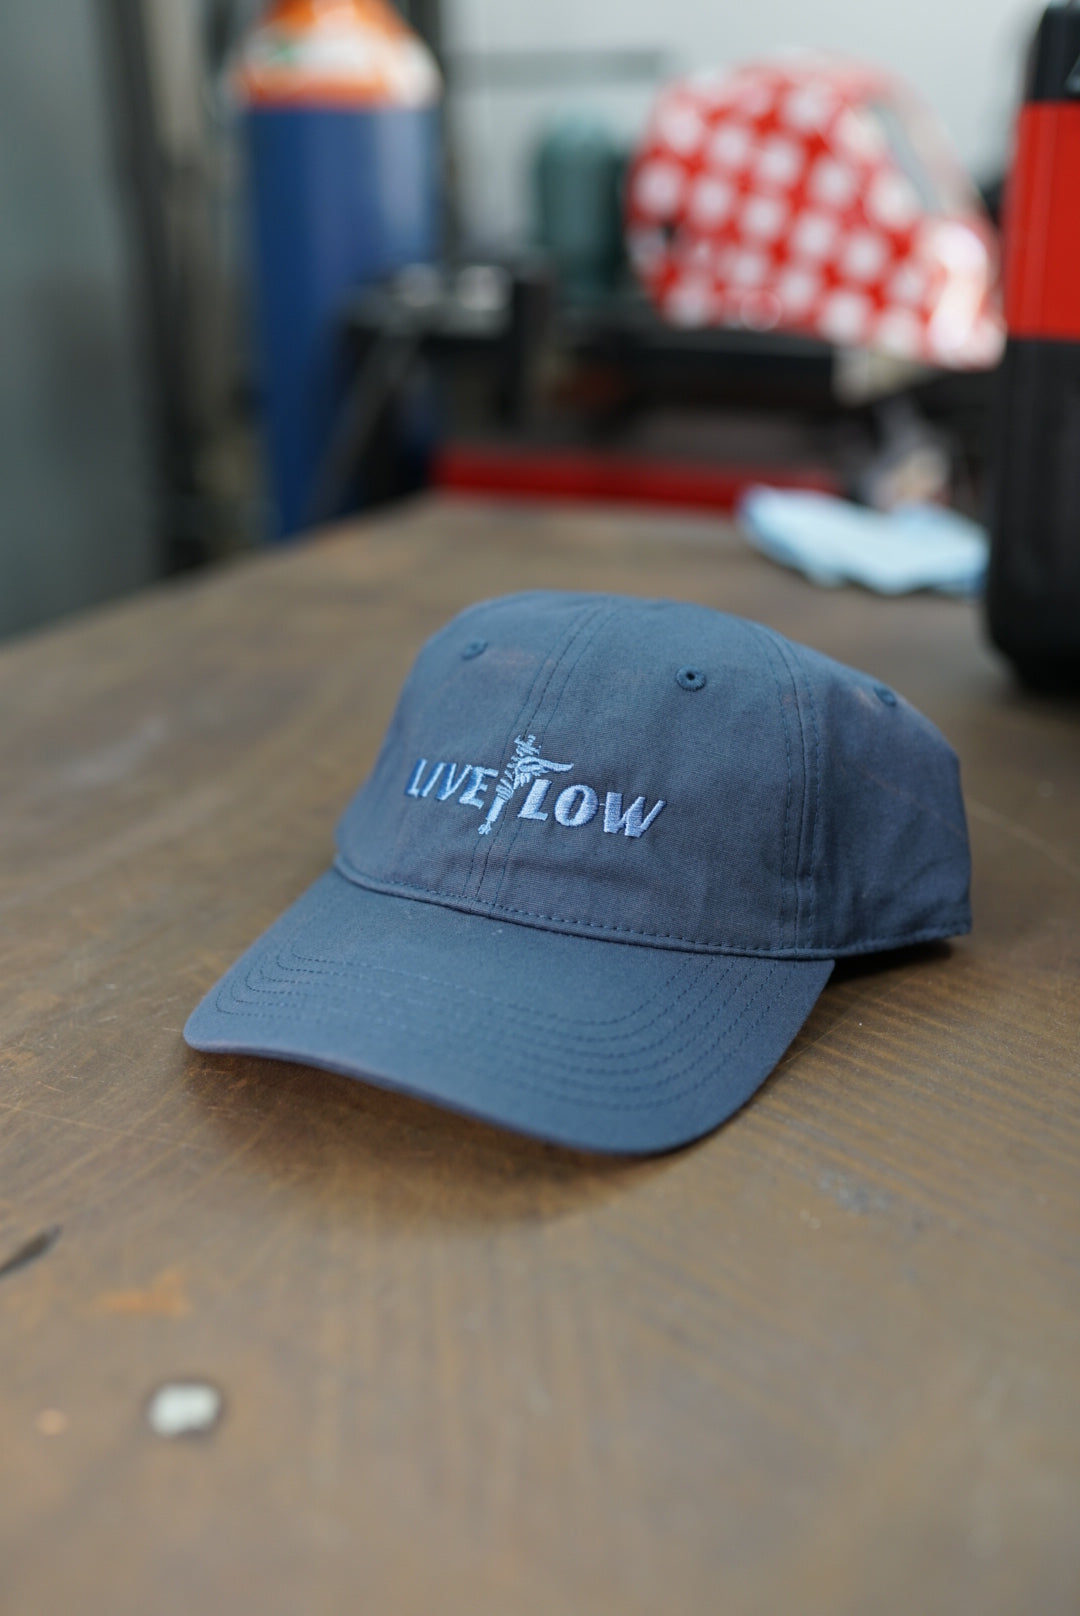 Live Low Winged Hat - Dusty Blue